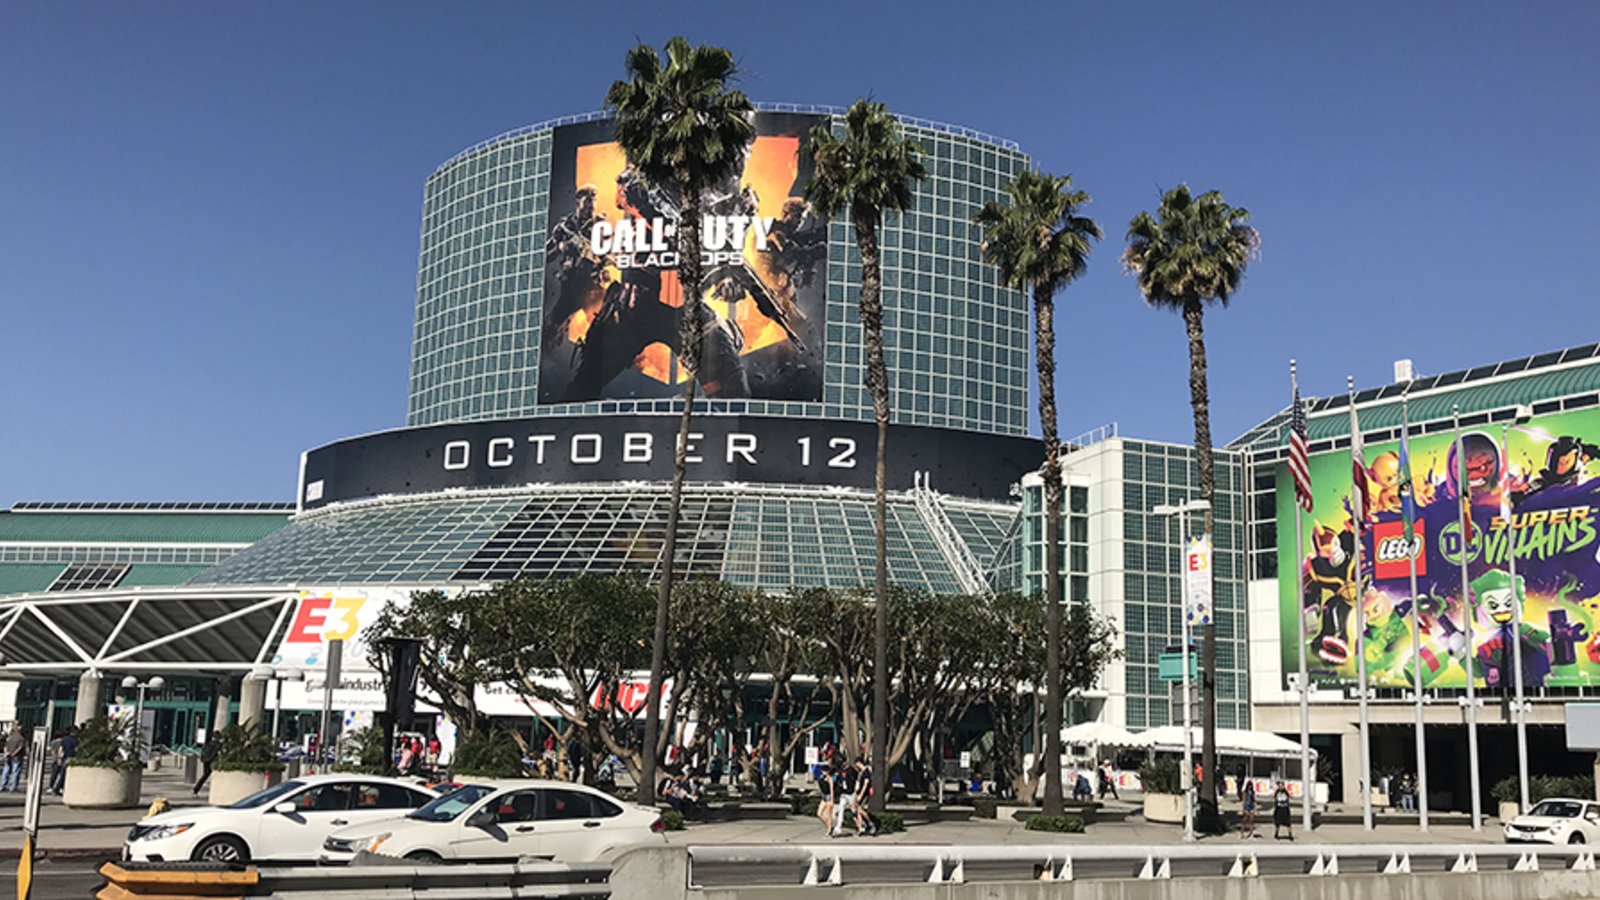 Xbox confirms it will 'return to LA' with a summer showcase this year | VGC